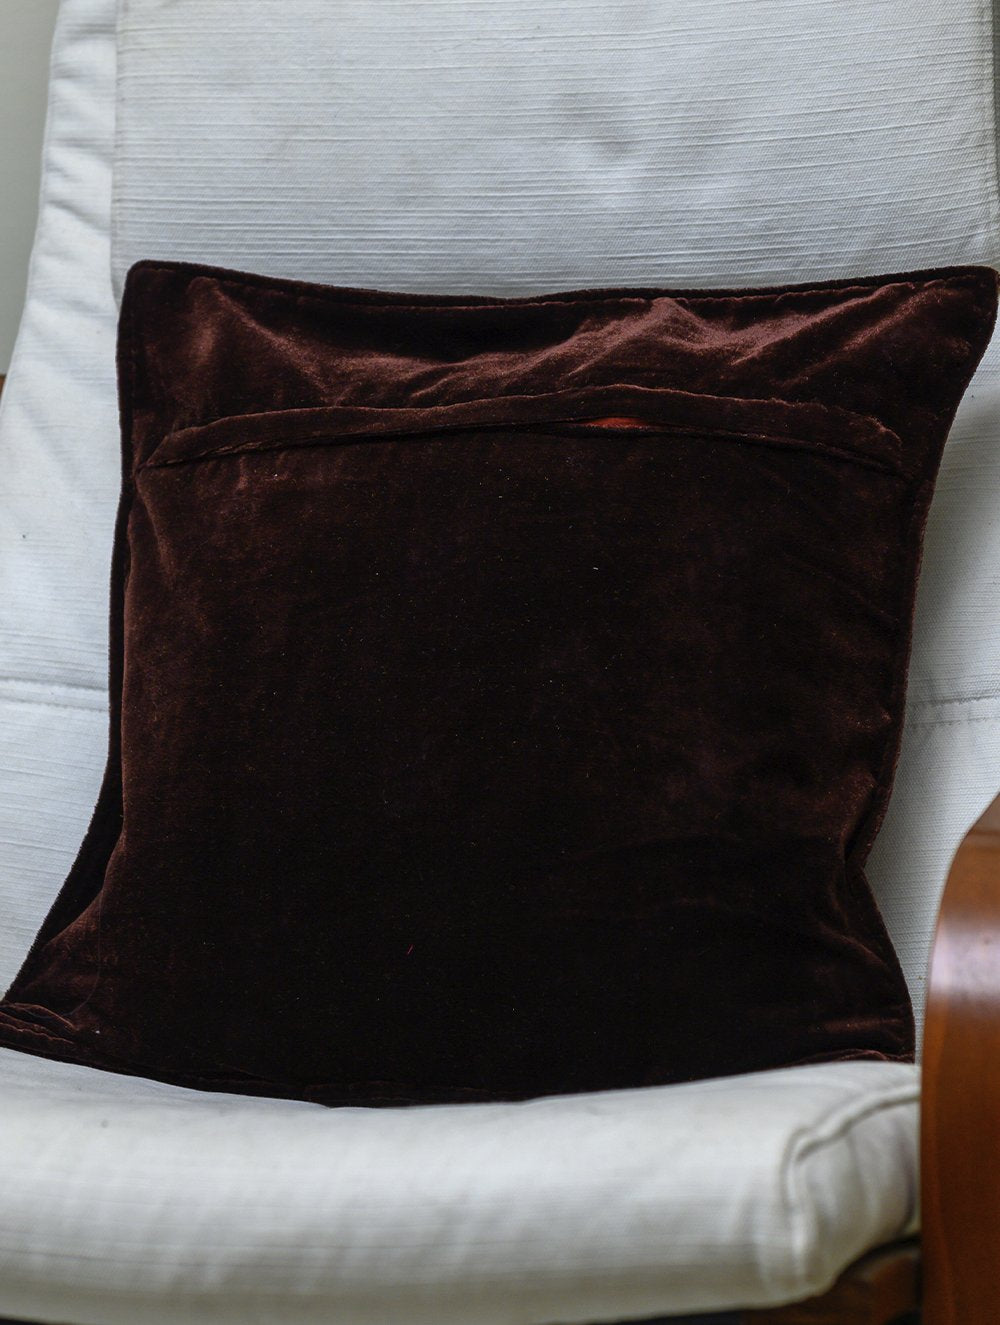 Load image into Gallery viewer, Exquisite Resham Zardozi Hand Embroidered Velvet Cushion Cover - Bud (Piece)